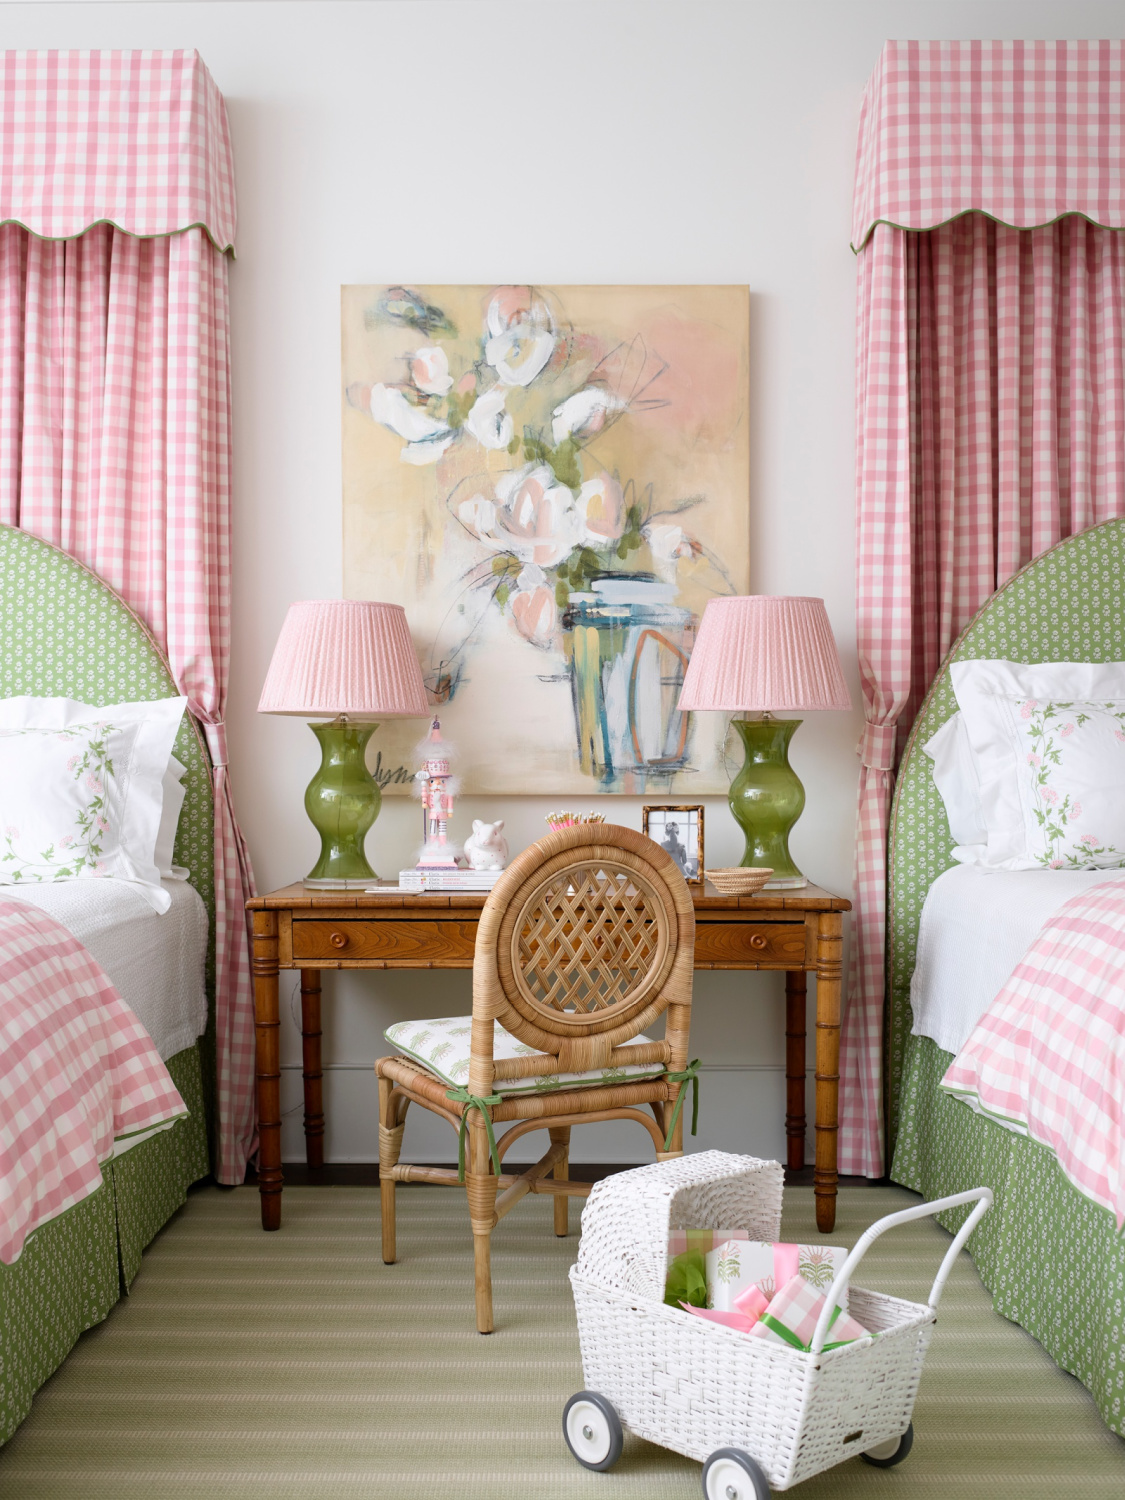 Courtney Giles designed bedroom in Atlanta Home for the Holidays.